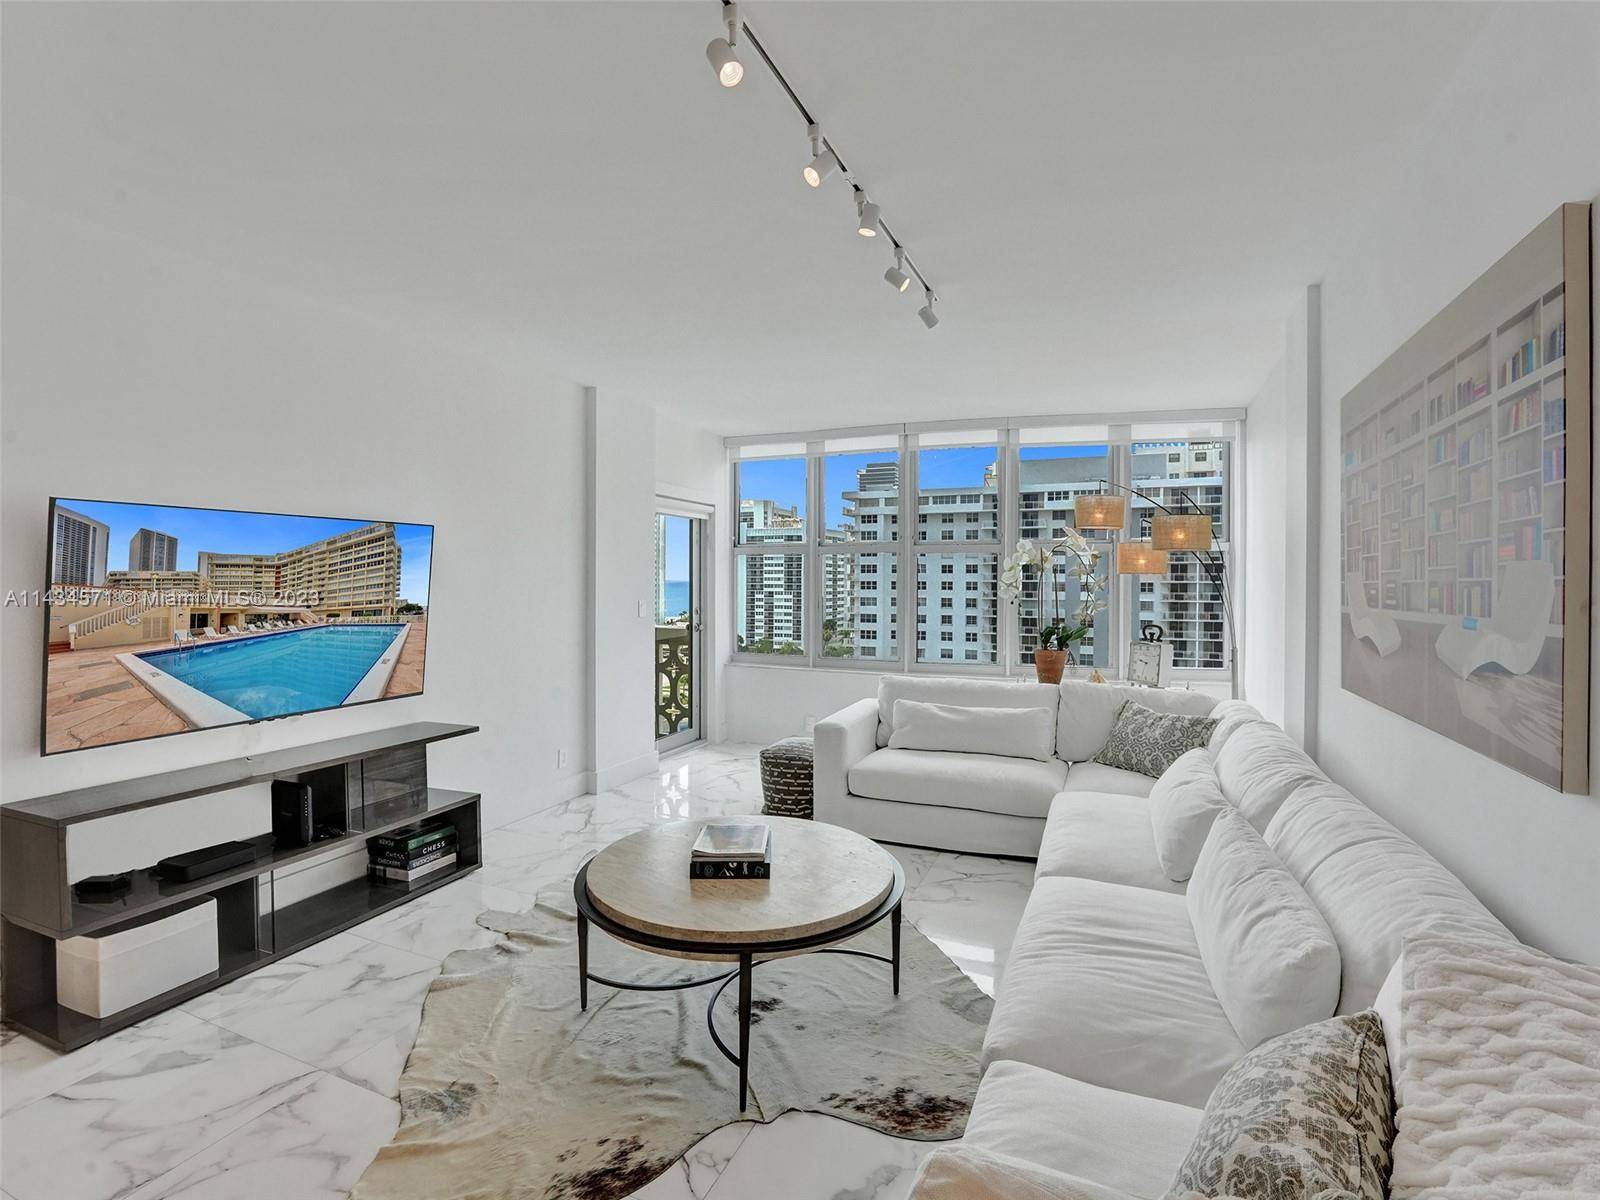 Exquisite penthouse in the heart of Hallandale beach directly across the street from the ocean with spectacular views of the city, skyline ocean.